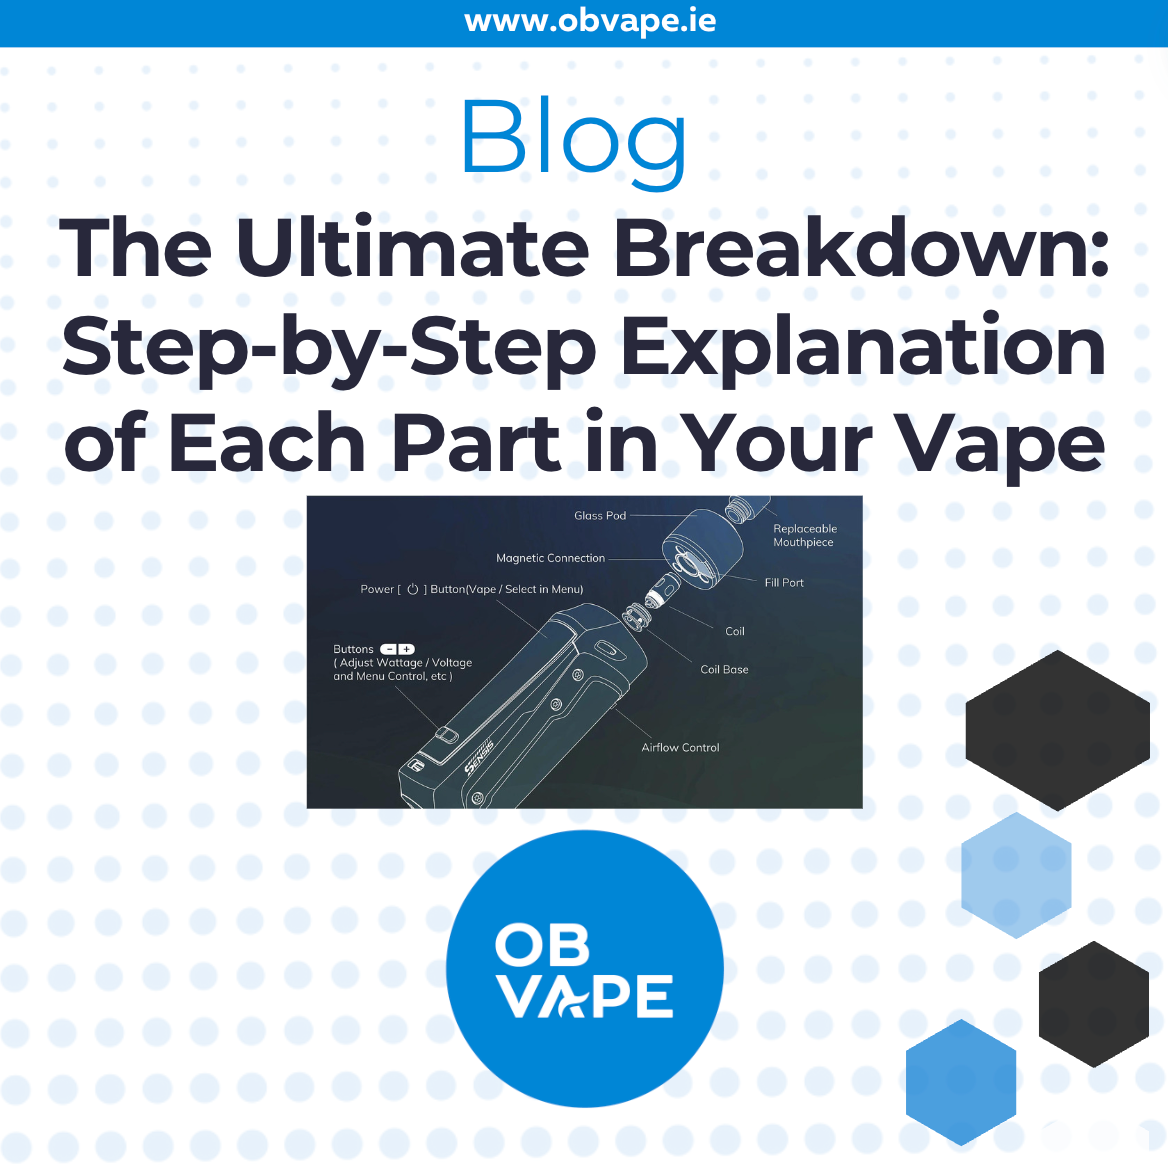 The Ultimate Breakdown: Step-by-Step Explanation of Each Part in Your Vape